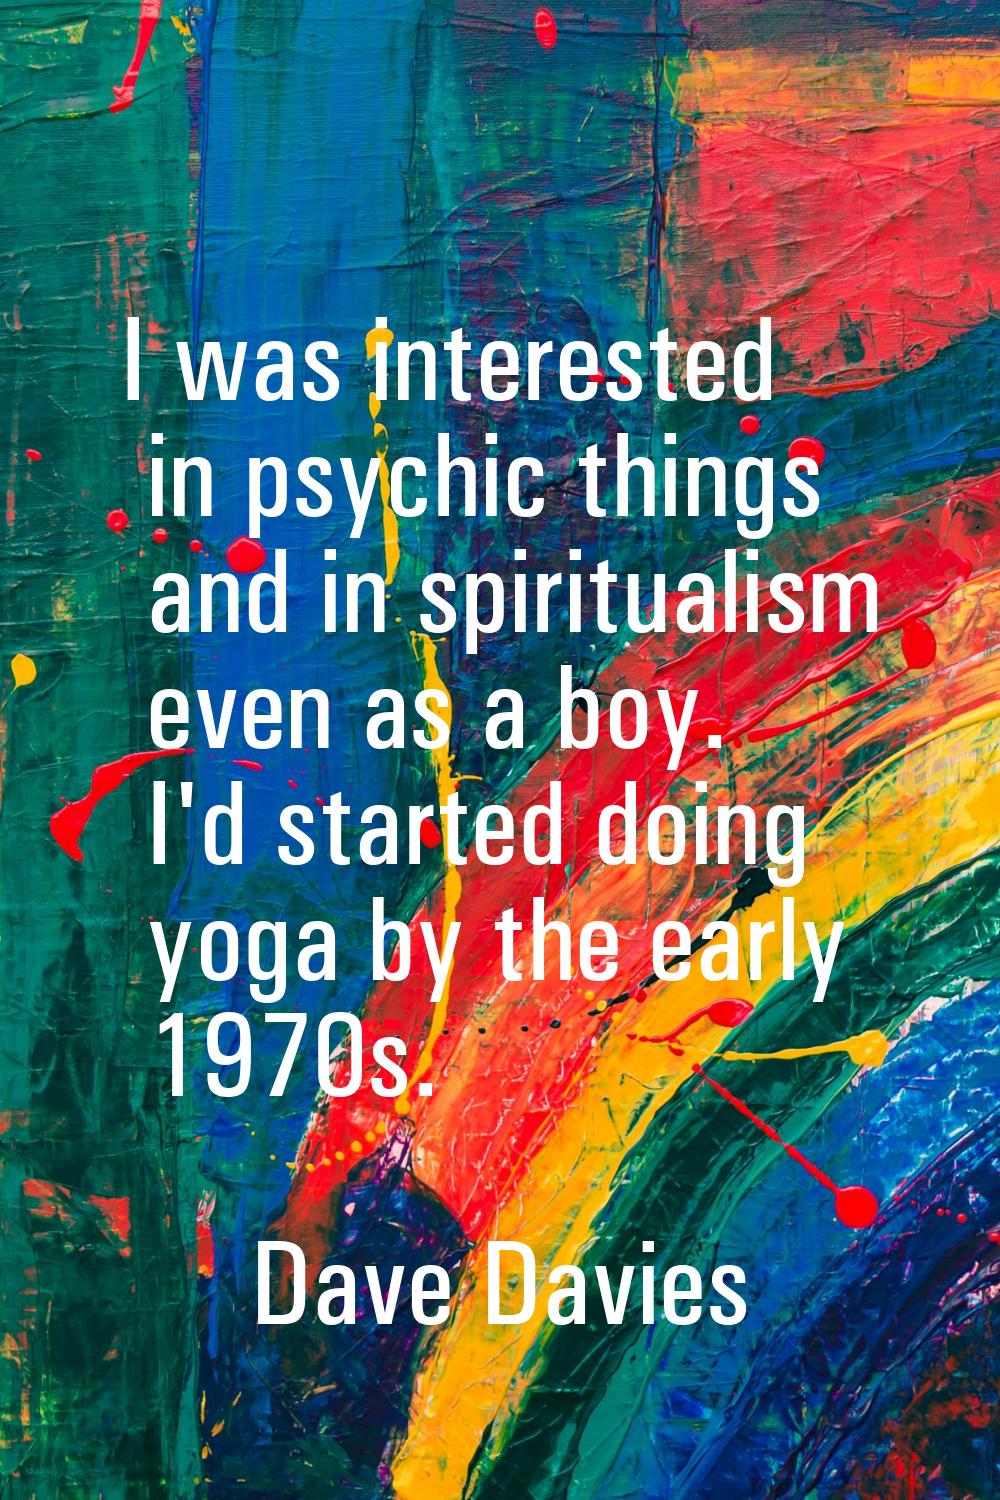 I was interested in psychic things and in spiritualism even as a boy. I'd started doing yoga by the